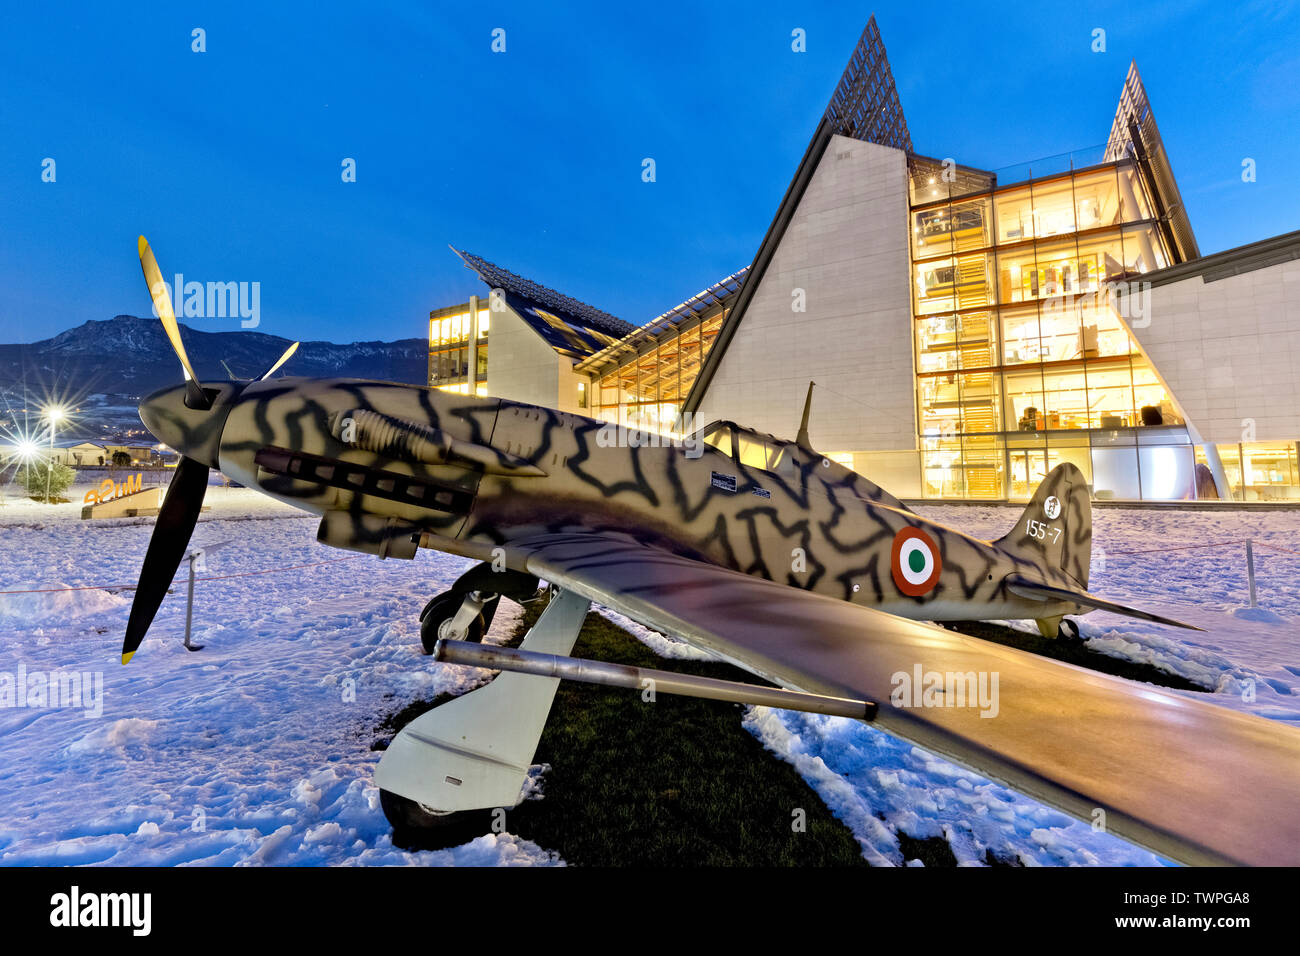 The Aermacchi 205 airplane and the Science Museum MUSE in Trento. Trentino Alto-Adige, Italy, Europe. Stock Photo